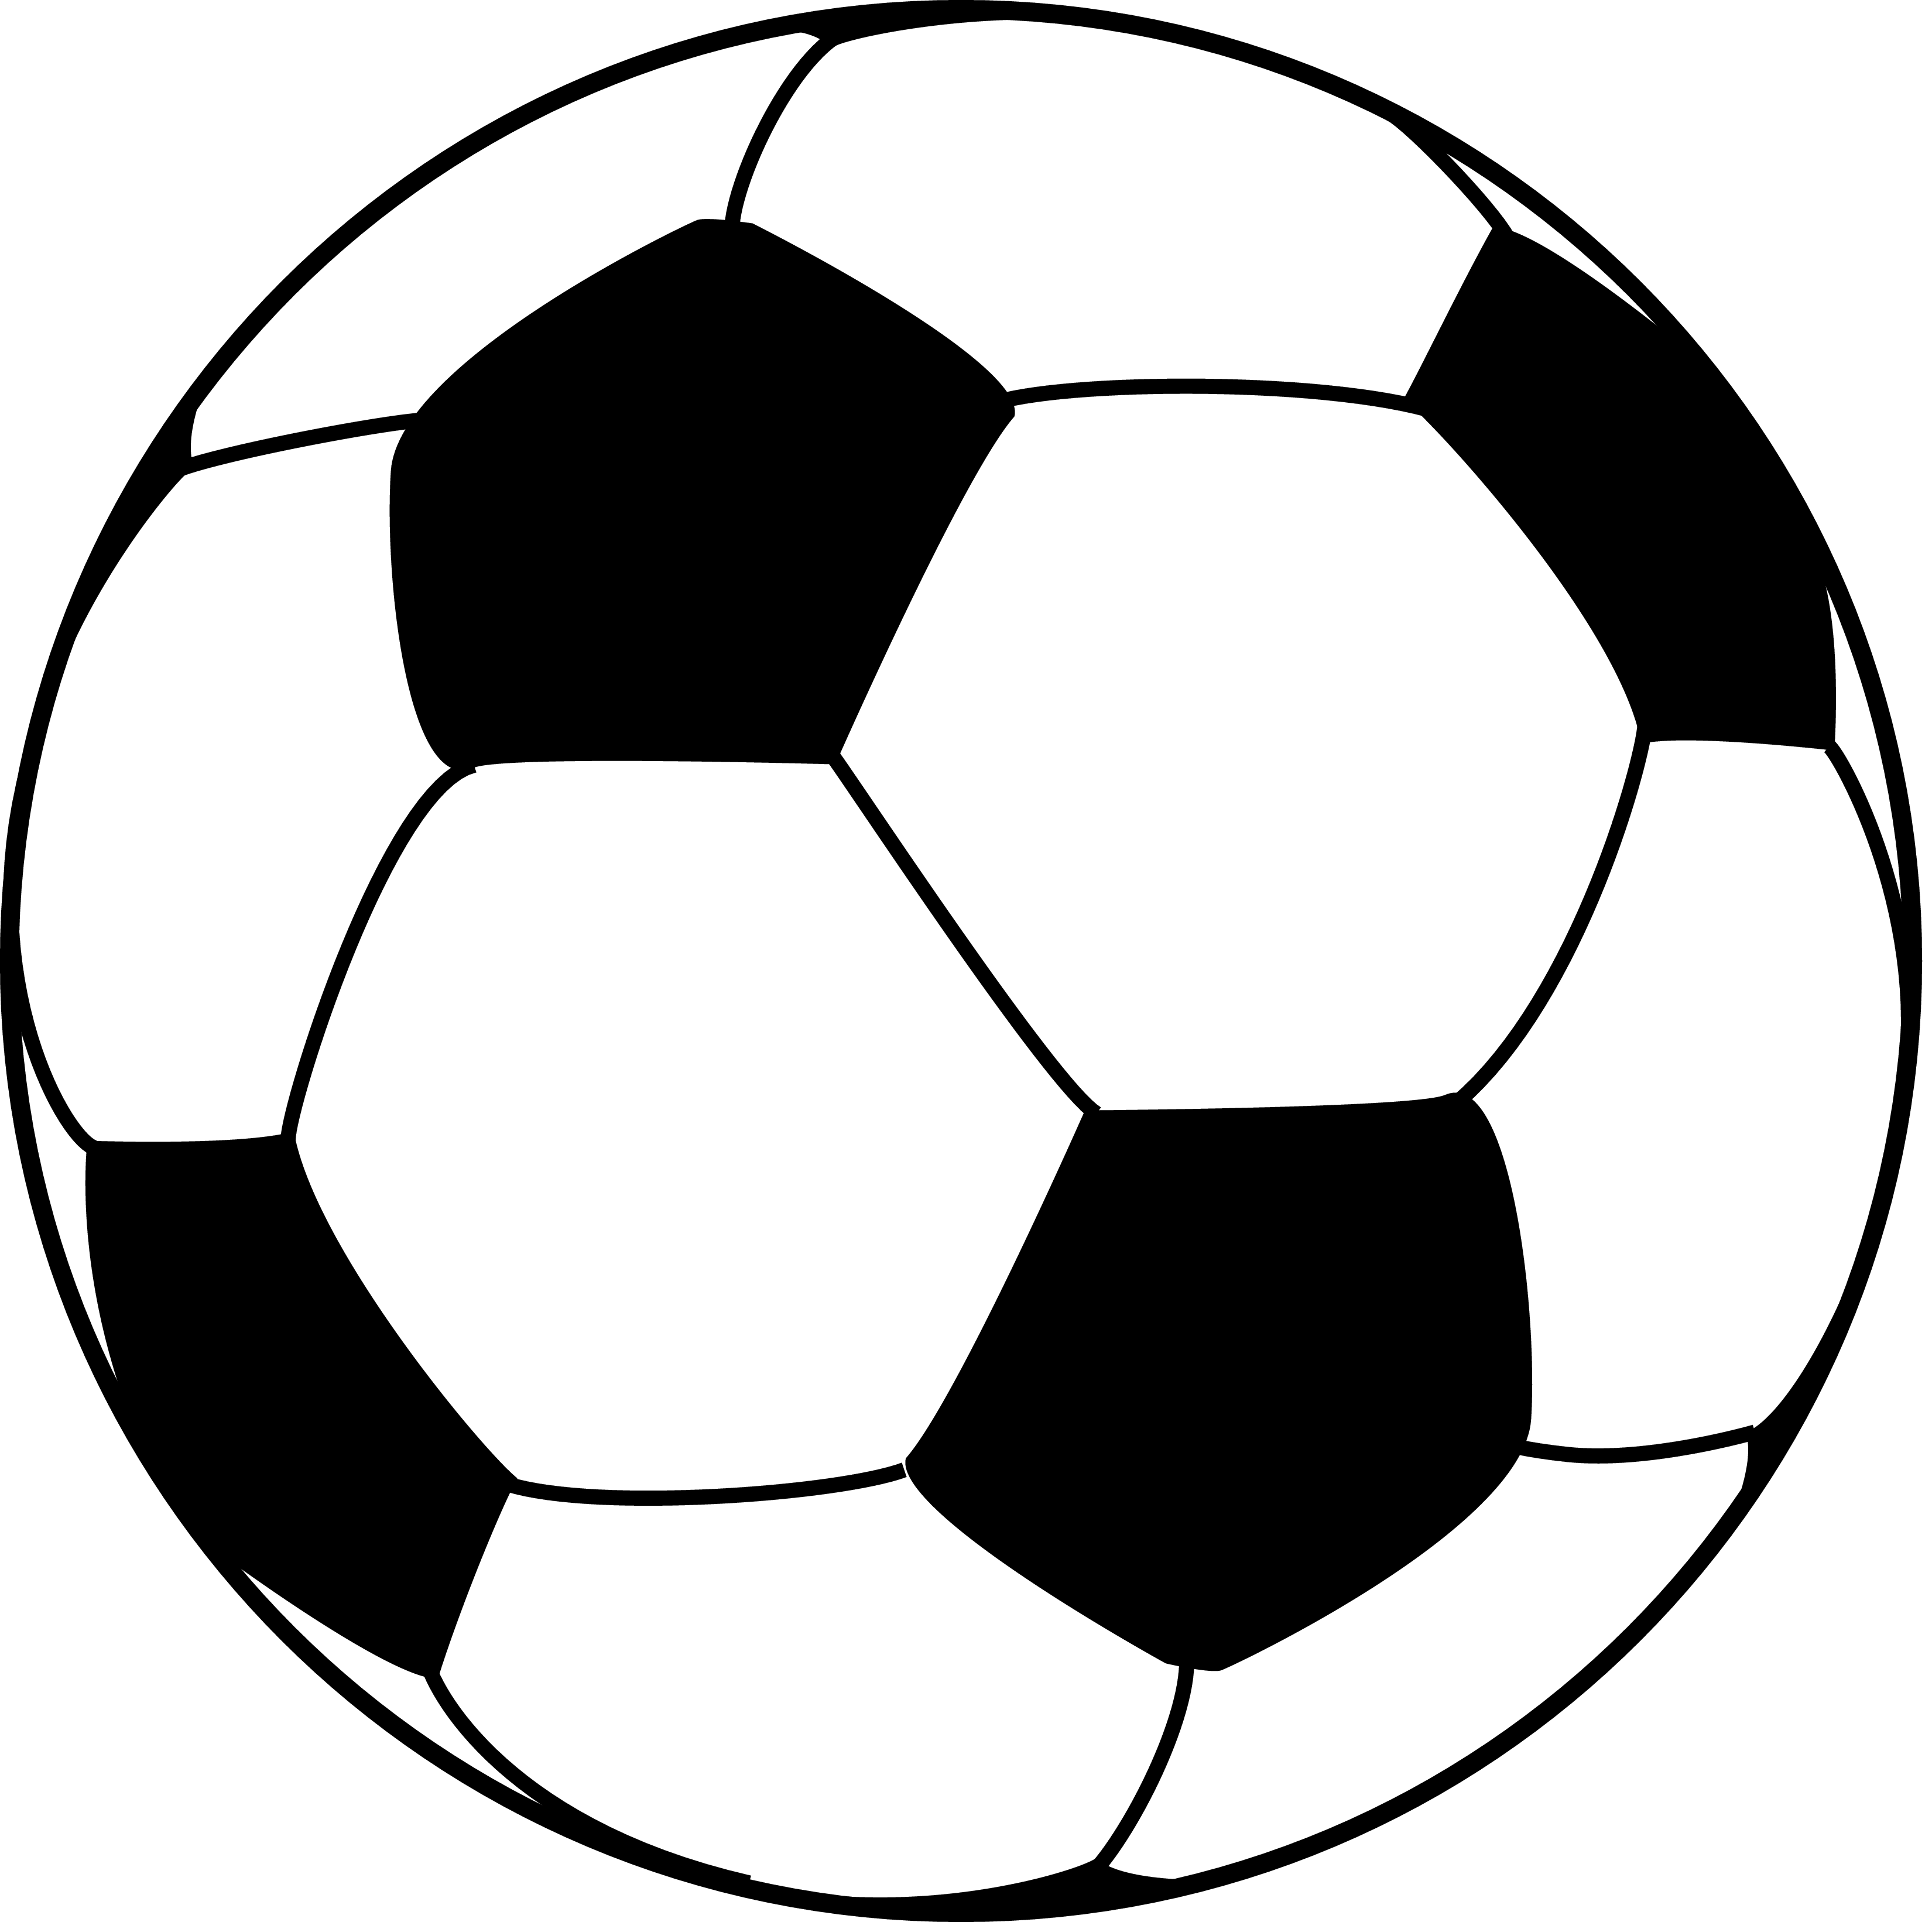 Drawing easy at getdrawings. Grass clipart soccer ball